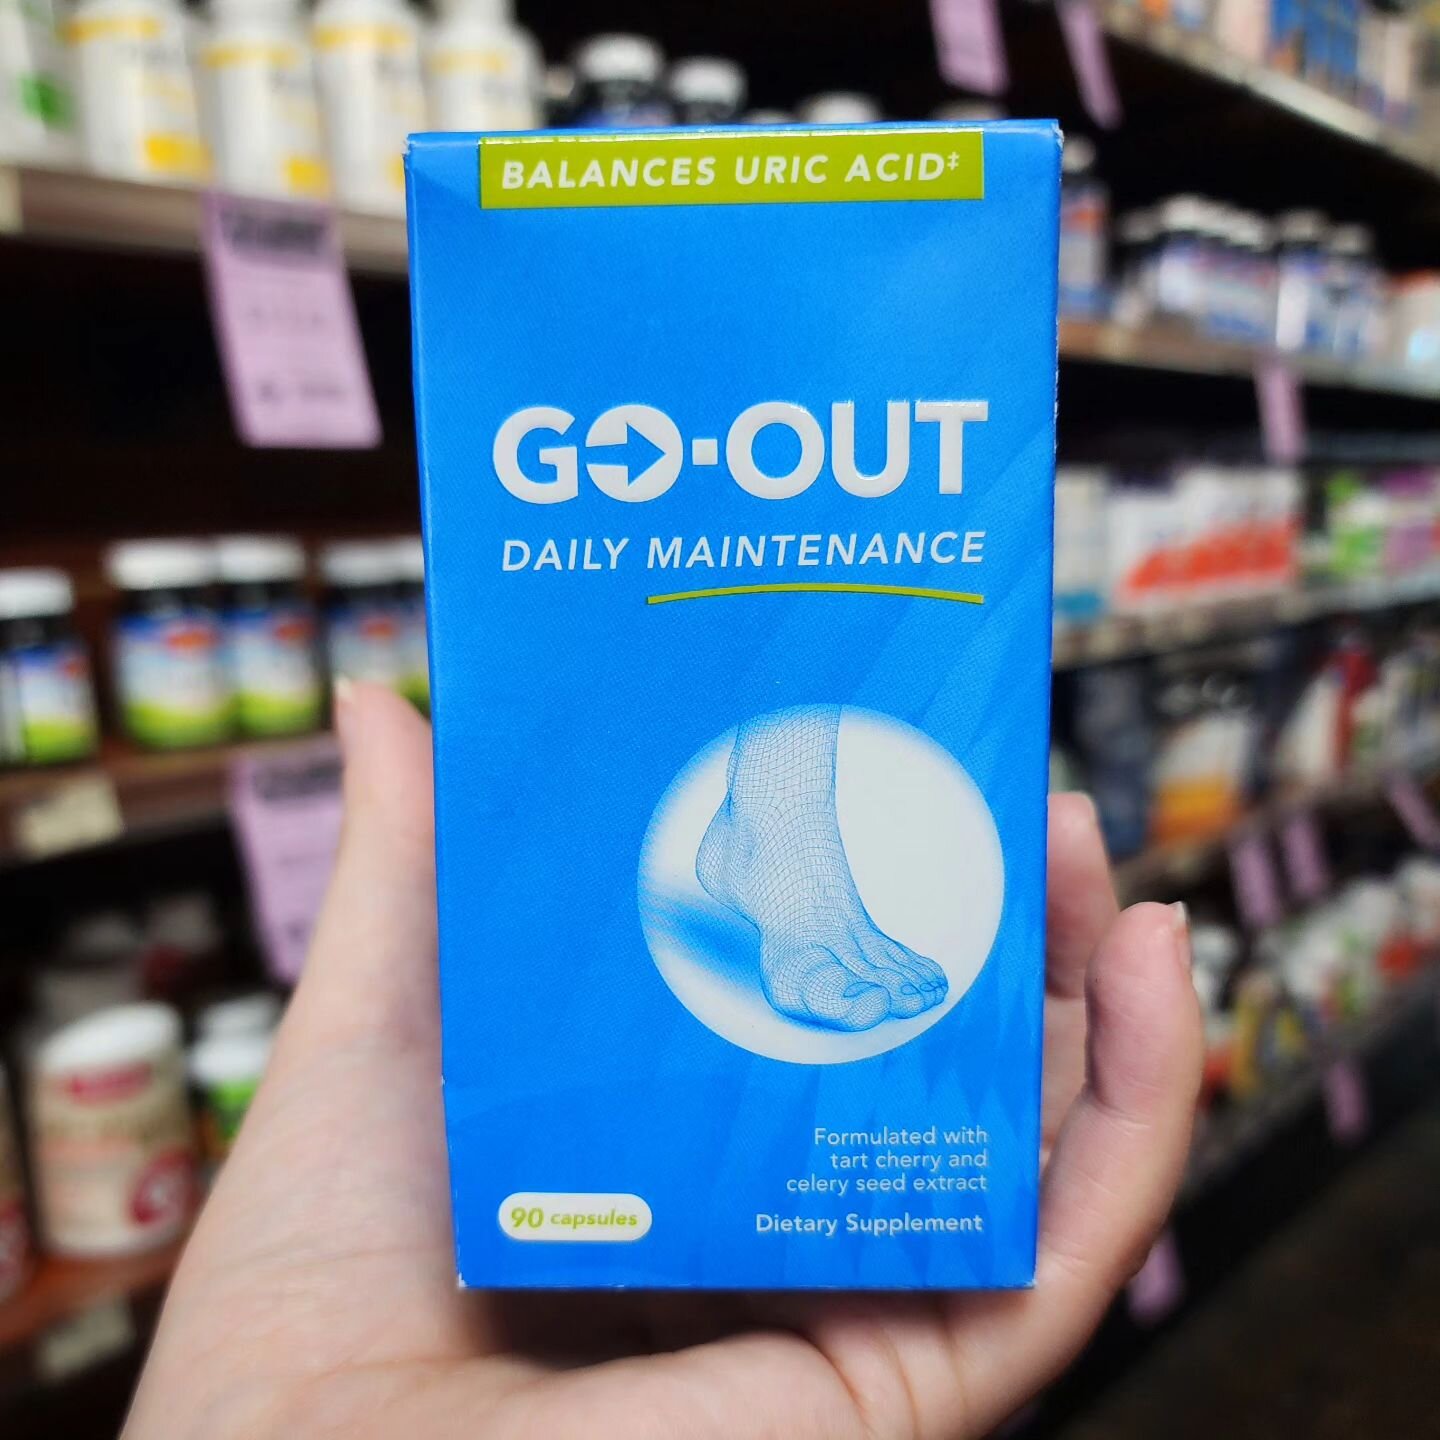 GO-OUT Daily Maintenance provides a natural option for routine gout support. 
✅️ Promotes pain-free circulation &yen;
✅️ Balances uric acid levels&yen;
✅️ no NSAID side effects&yen;